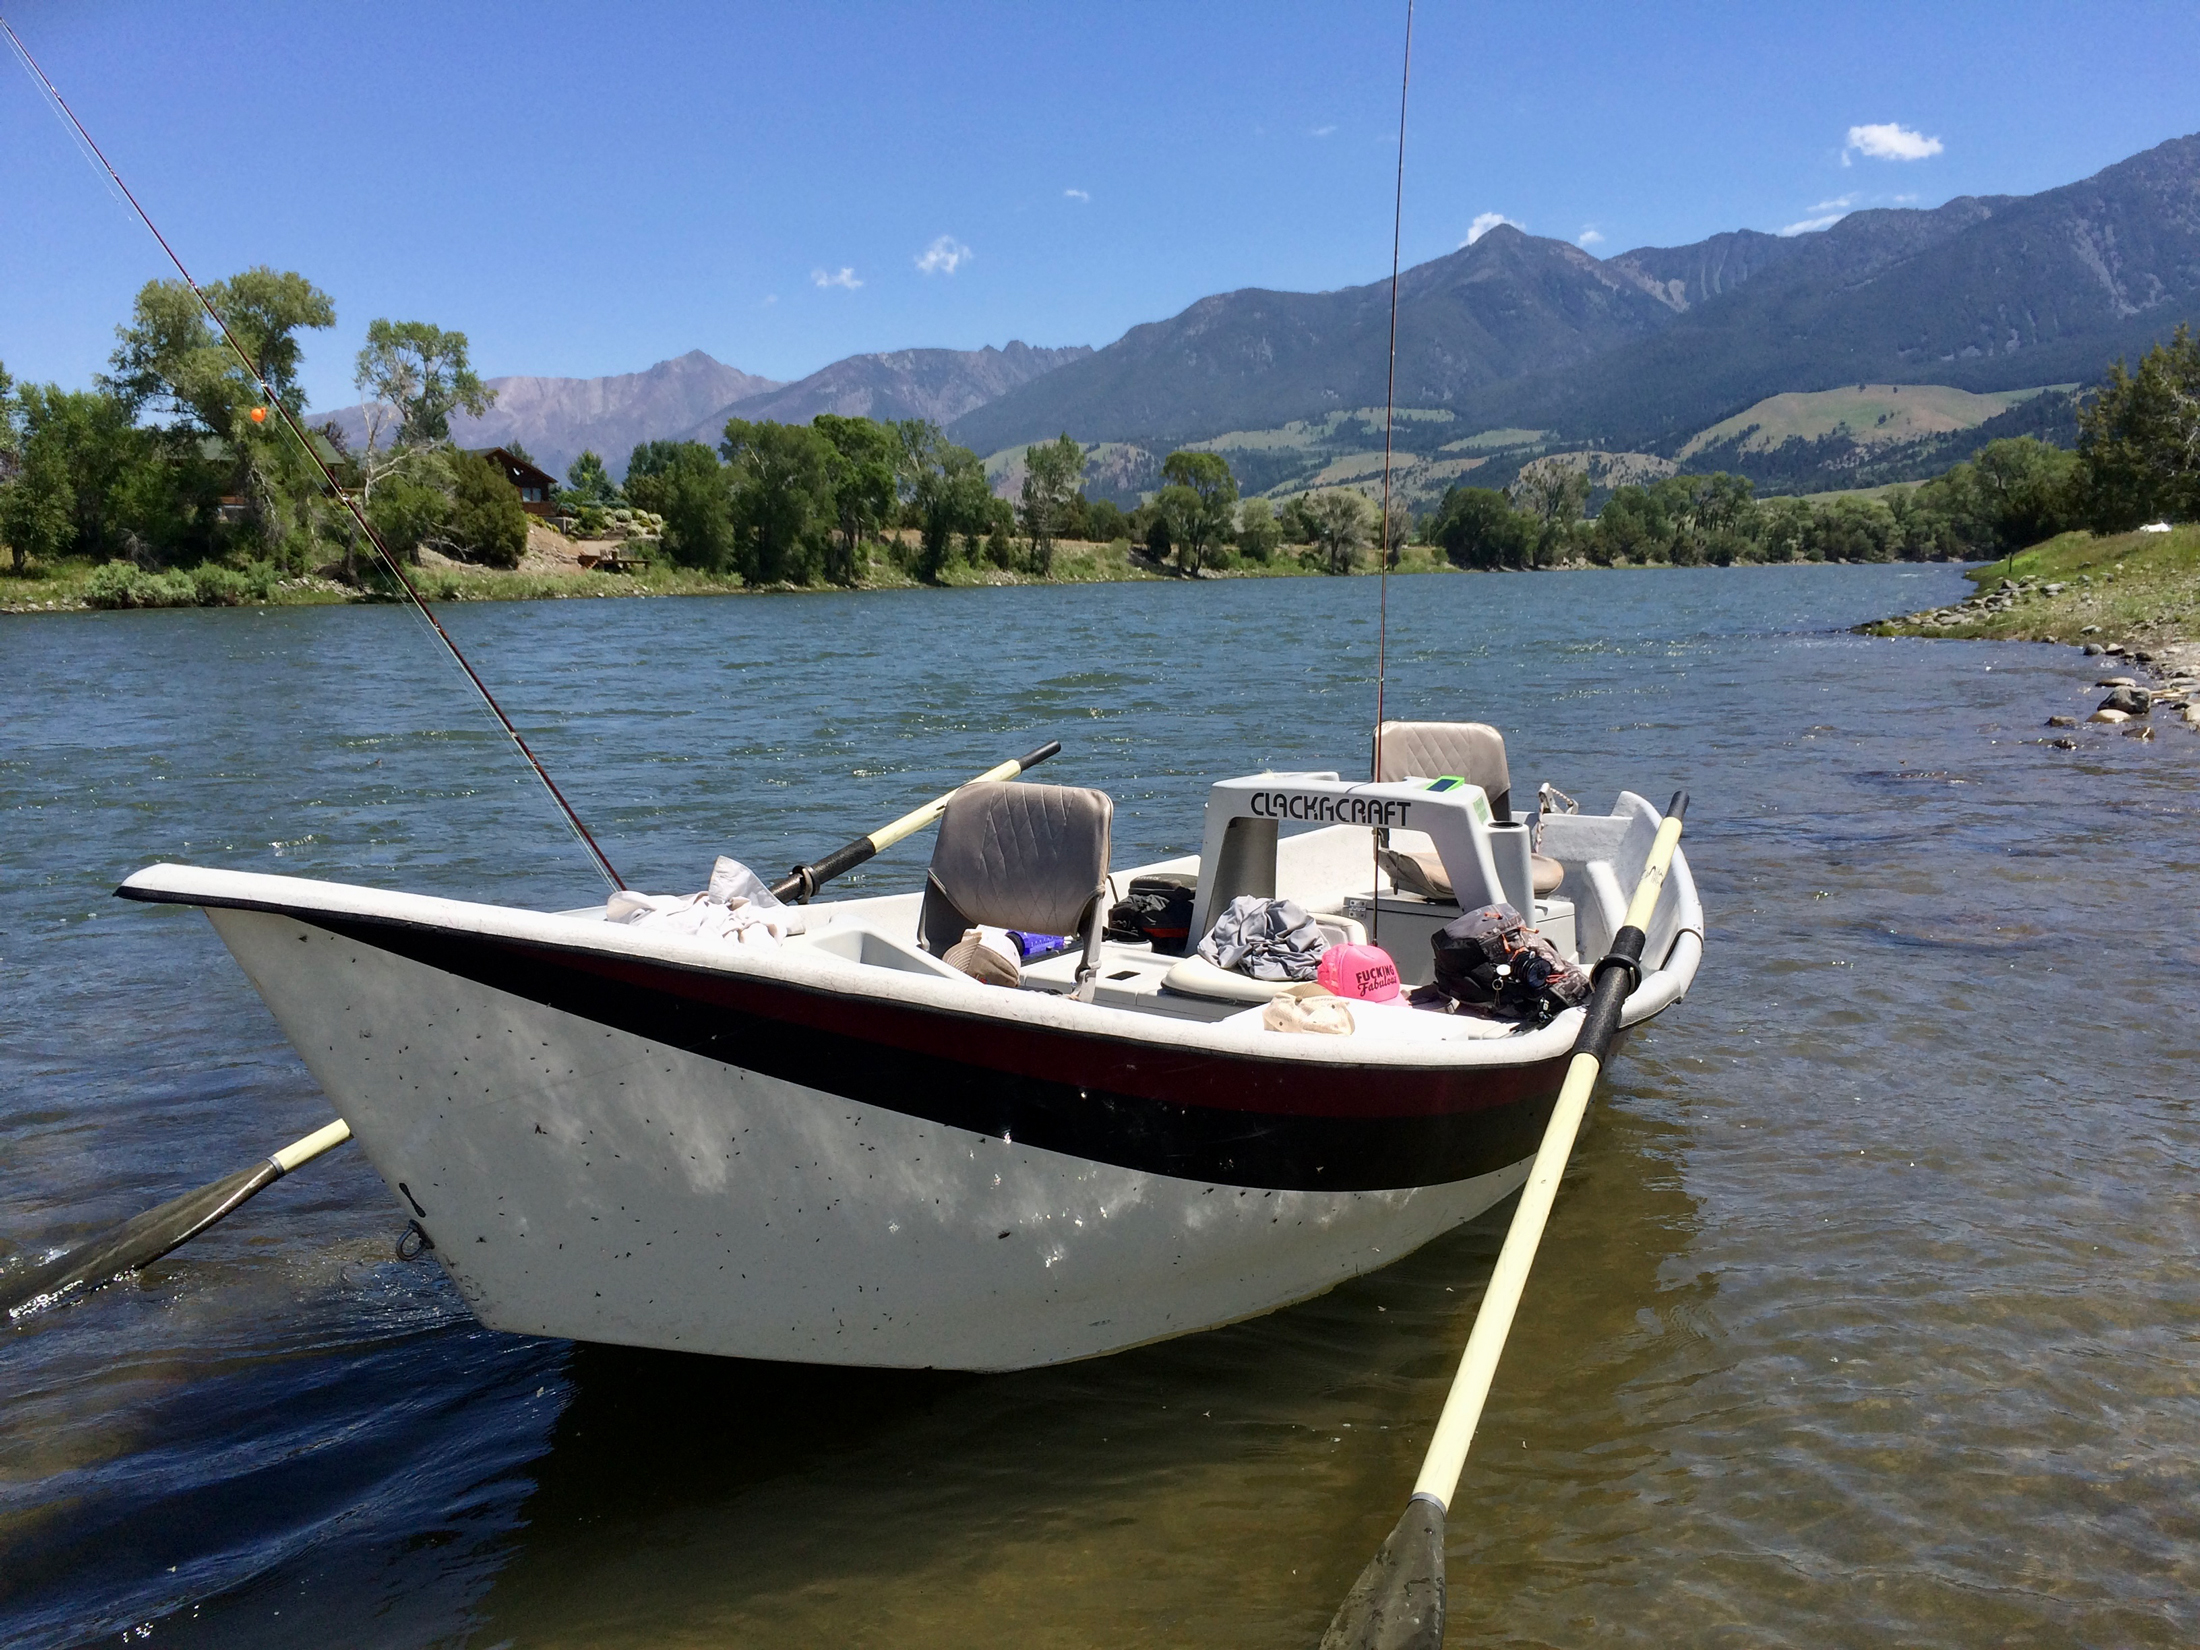 drift boat anchored in river with mountains in background